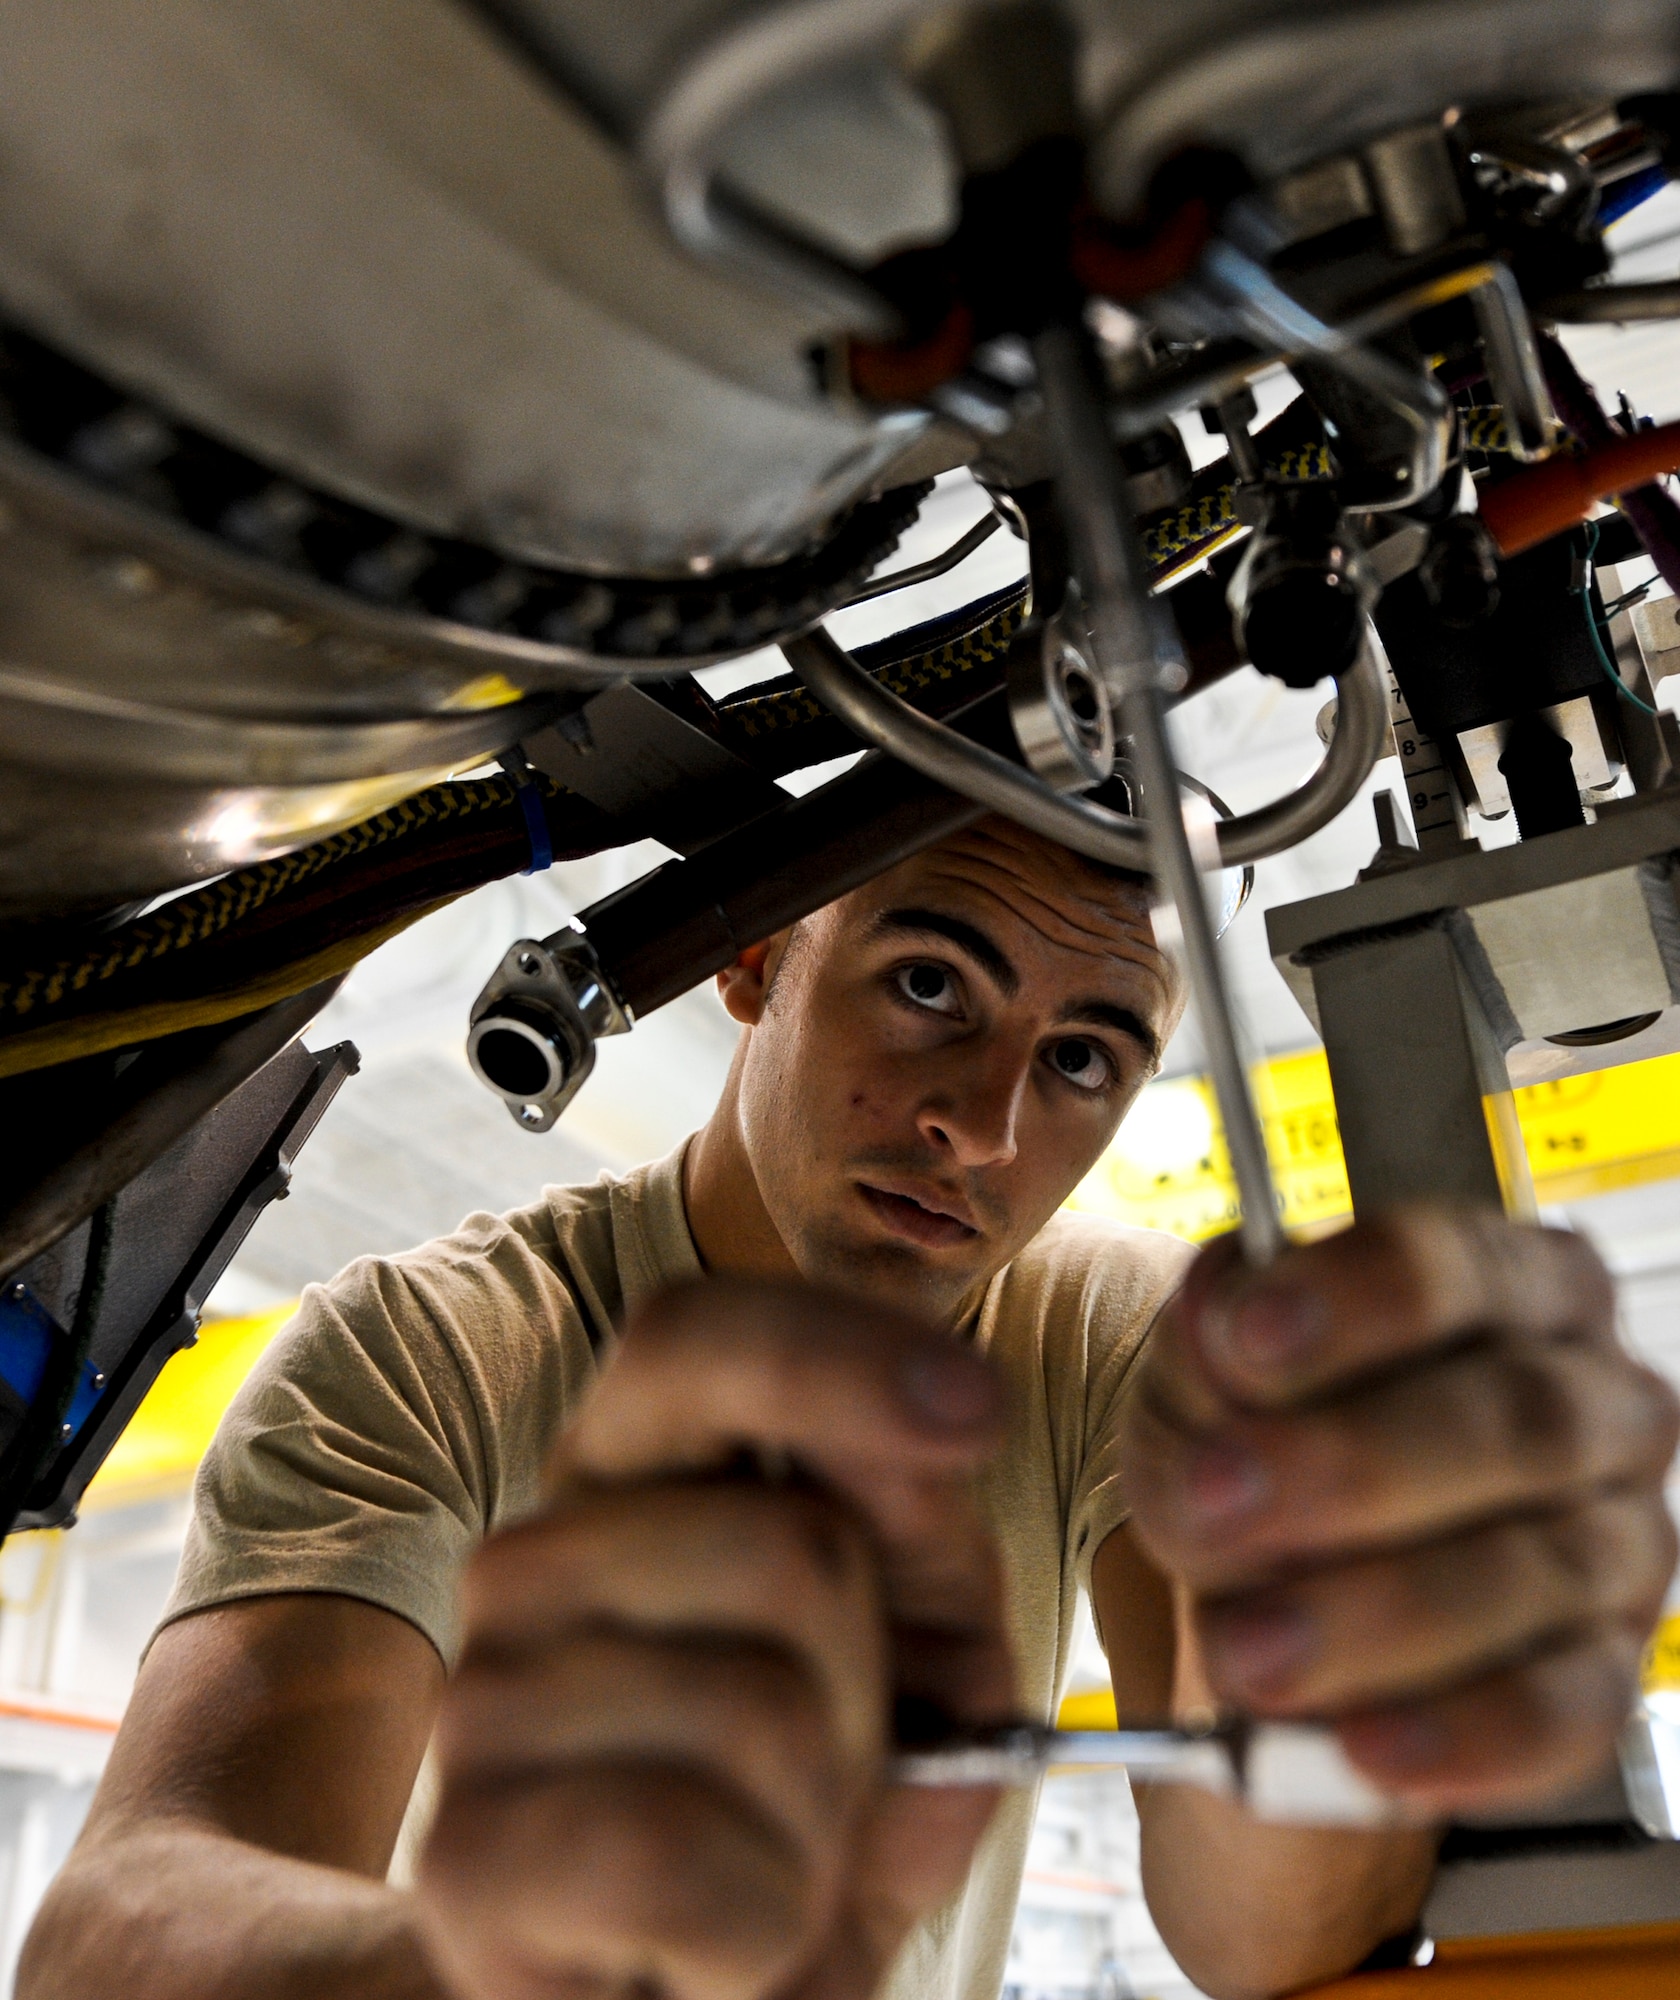 JOINT BASE ELMENDORF-RICHARDSON, Alaska – Airmen 1st Class Justin Bleich, jet mechanic for the 3rd Component Maintenance Squadron Propulsion Flight, performs maintenance on an F-22 Raptor F119-PW-100 engine Aug. 6. The 3rd CMS was recently named the recipients of the 2010 Secretary of Defense Field-Level Maintenance Award, small category. (Air Force photo by Airman 1st Class Christopher Gross)